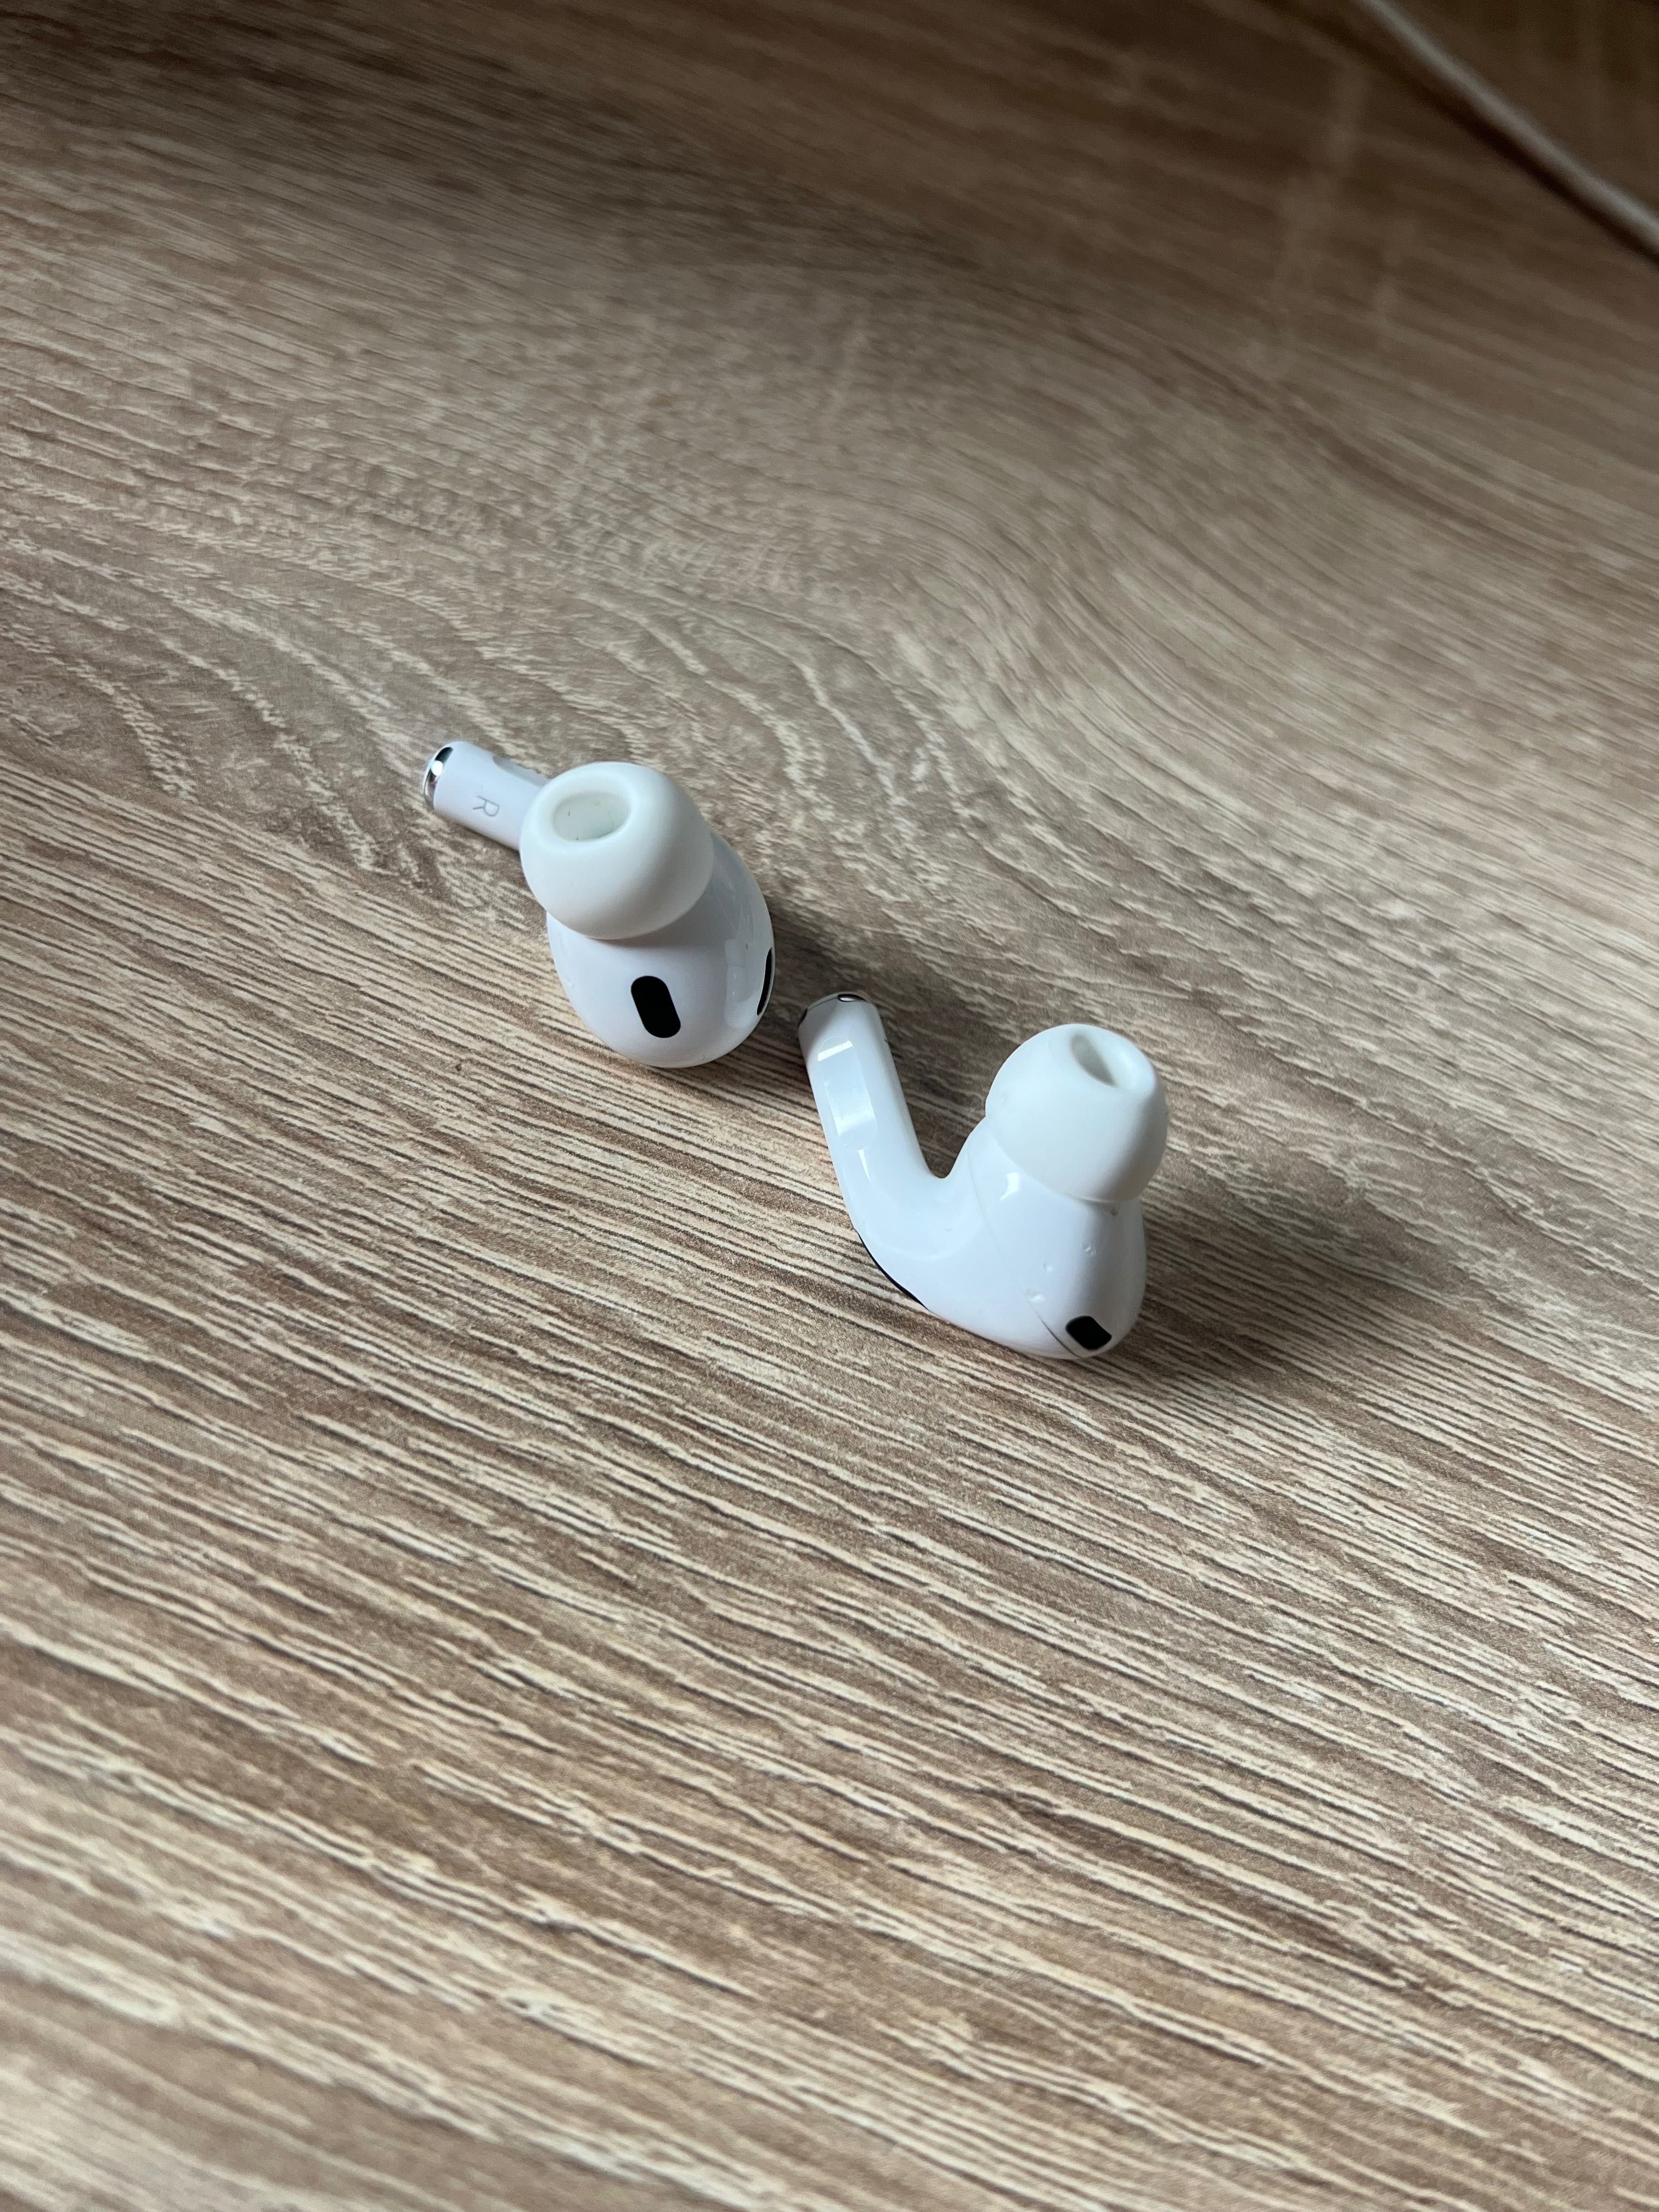 Apple airpods 2pro